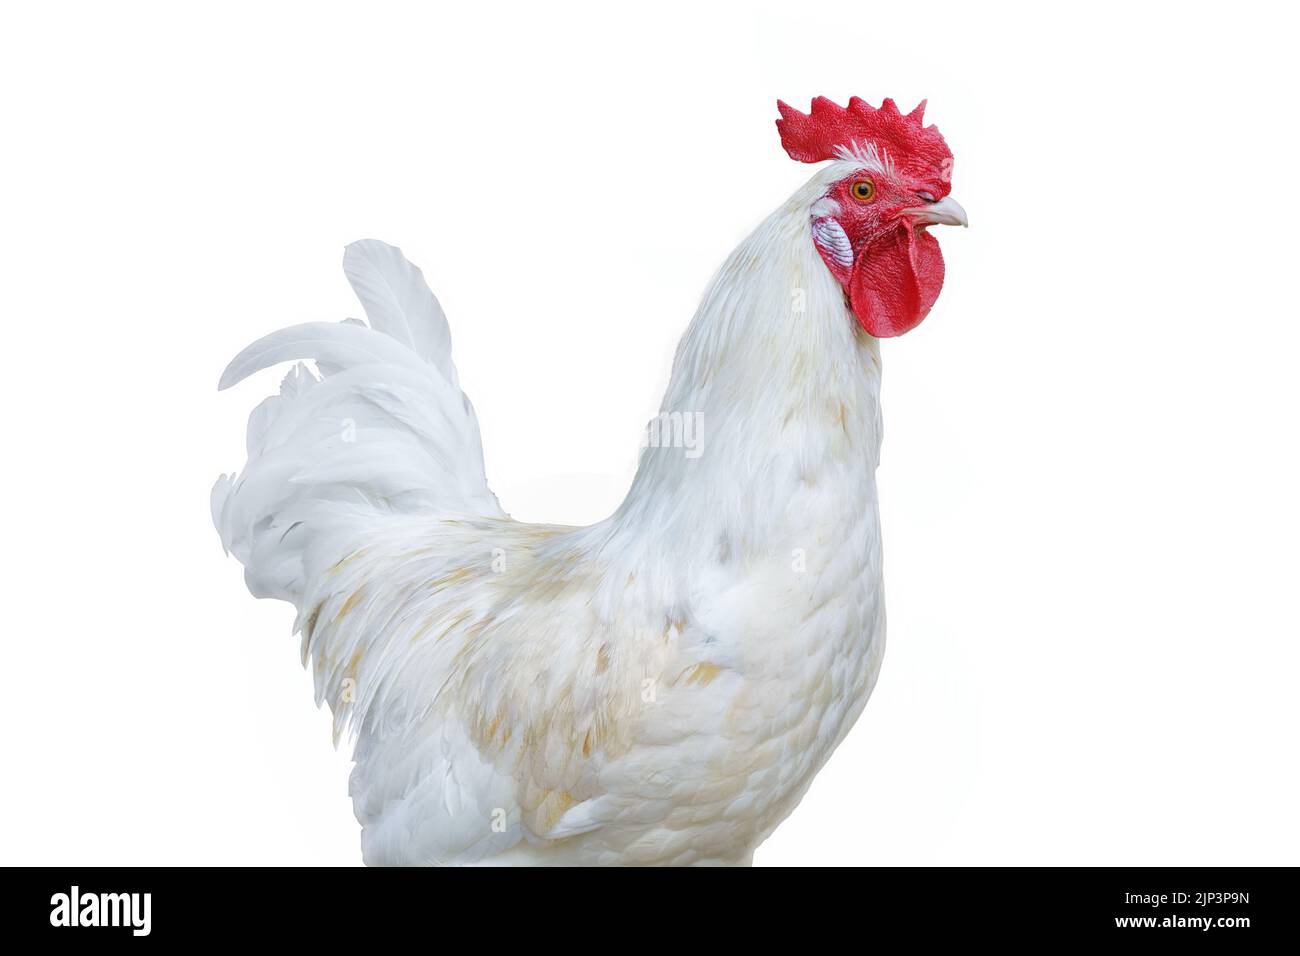 White rooster with bright red comb. Isolated on white, clipping path included Stock Photo